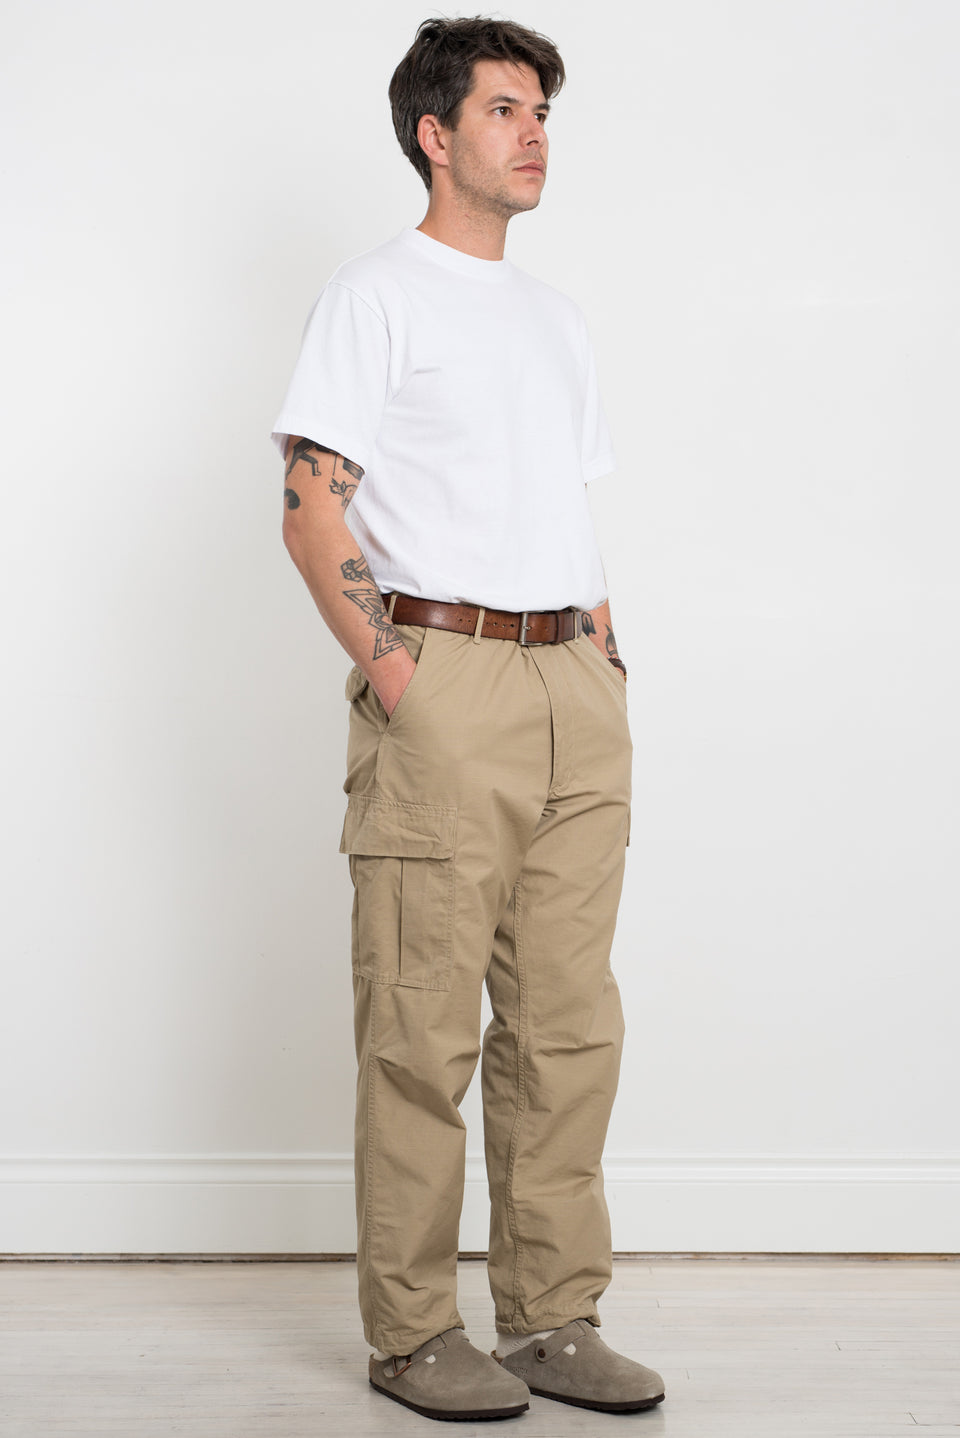 Buy Beige Four Pocket Cargo Pants Pure Cotton for Best Price, Reviews, Free  Shipping